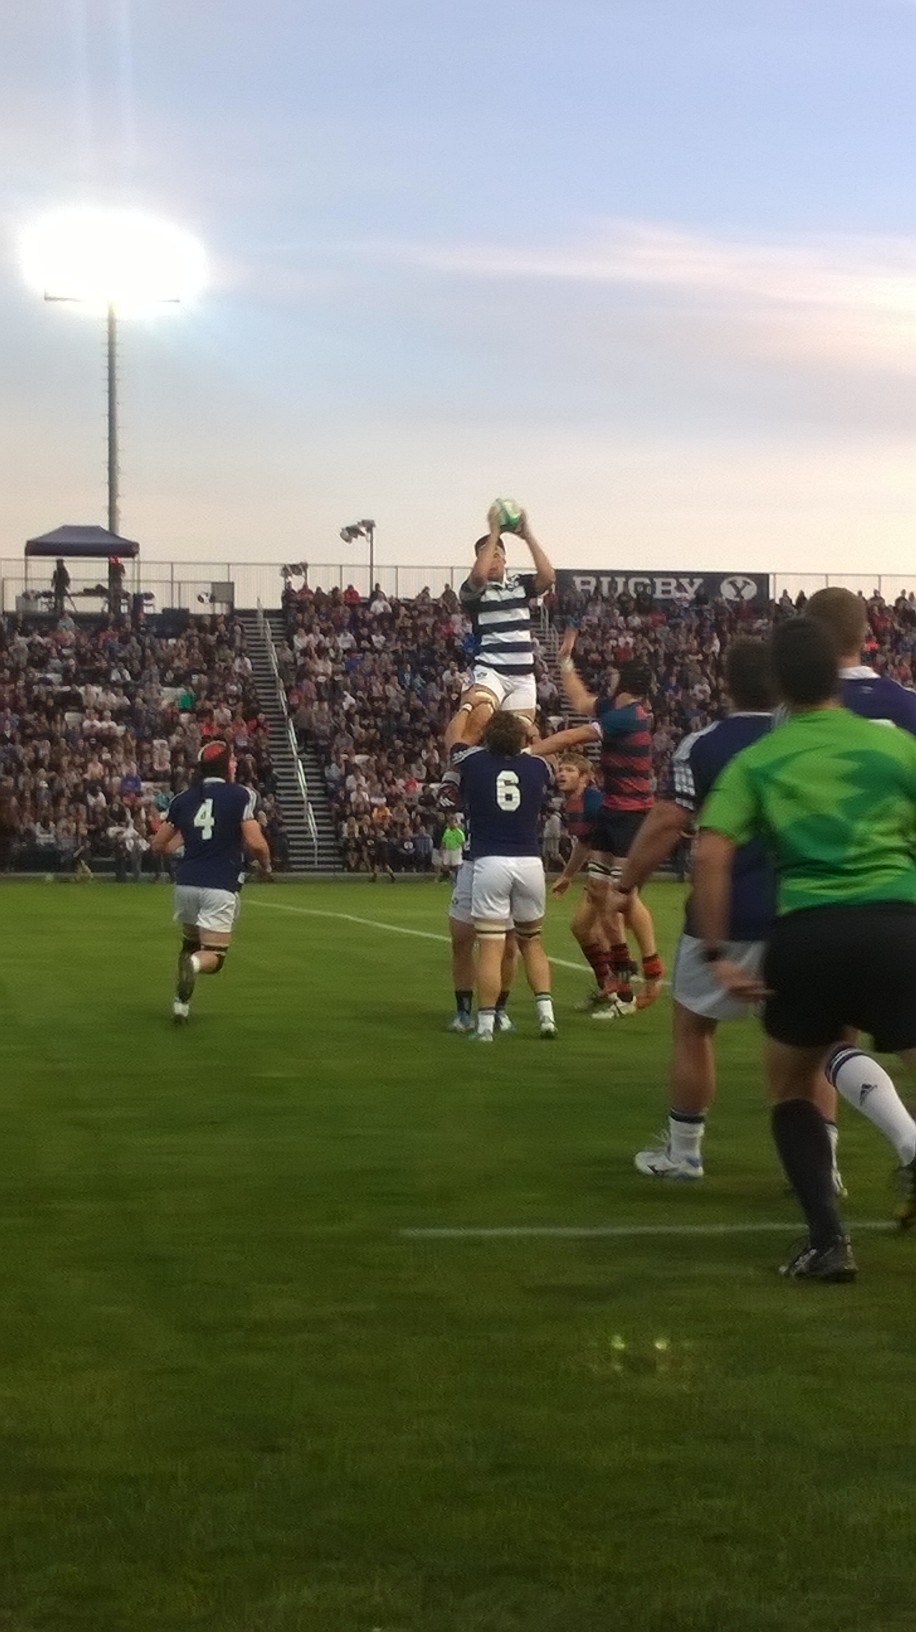 BYU wins a line out against Saint Mary's